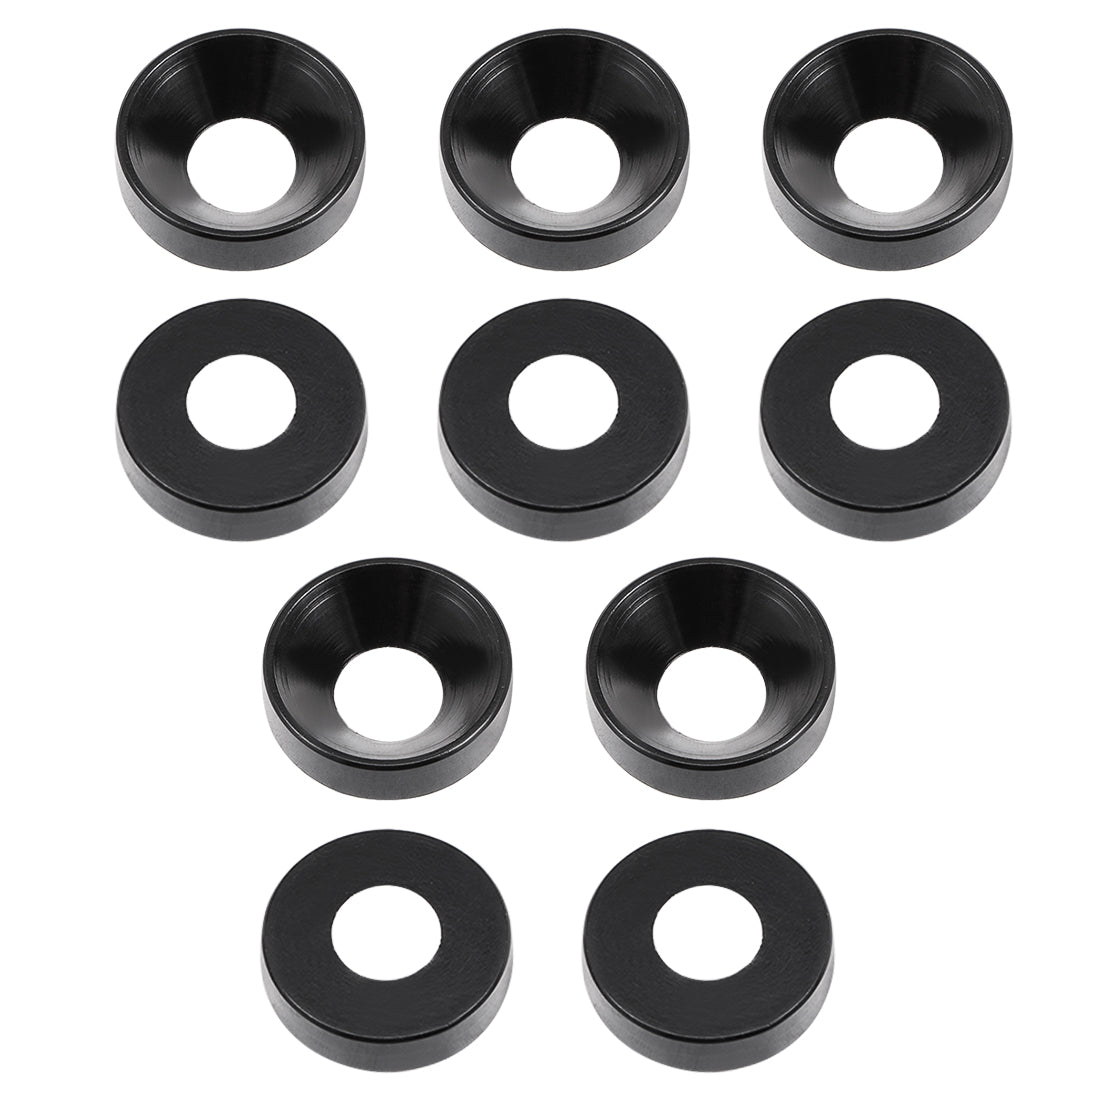 Uxcell Uxcell 10 Pcs 12mm x 5mm x 3.2mm Aluminum Alloy Countersunk Washer Silver